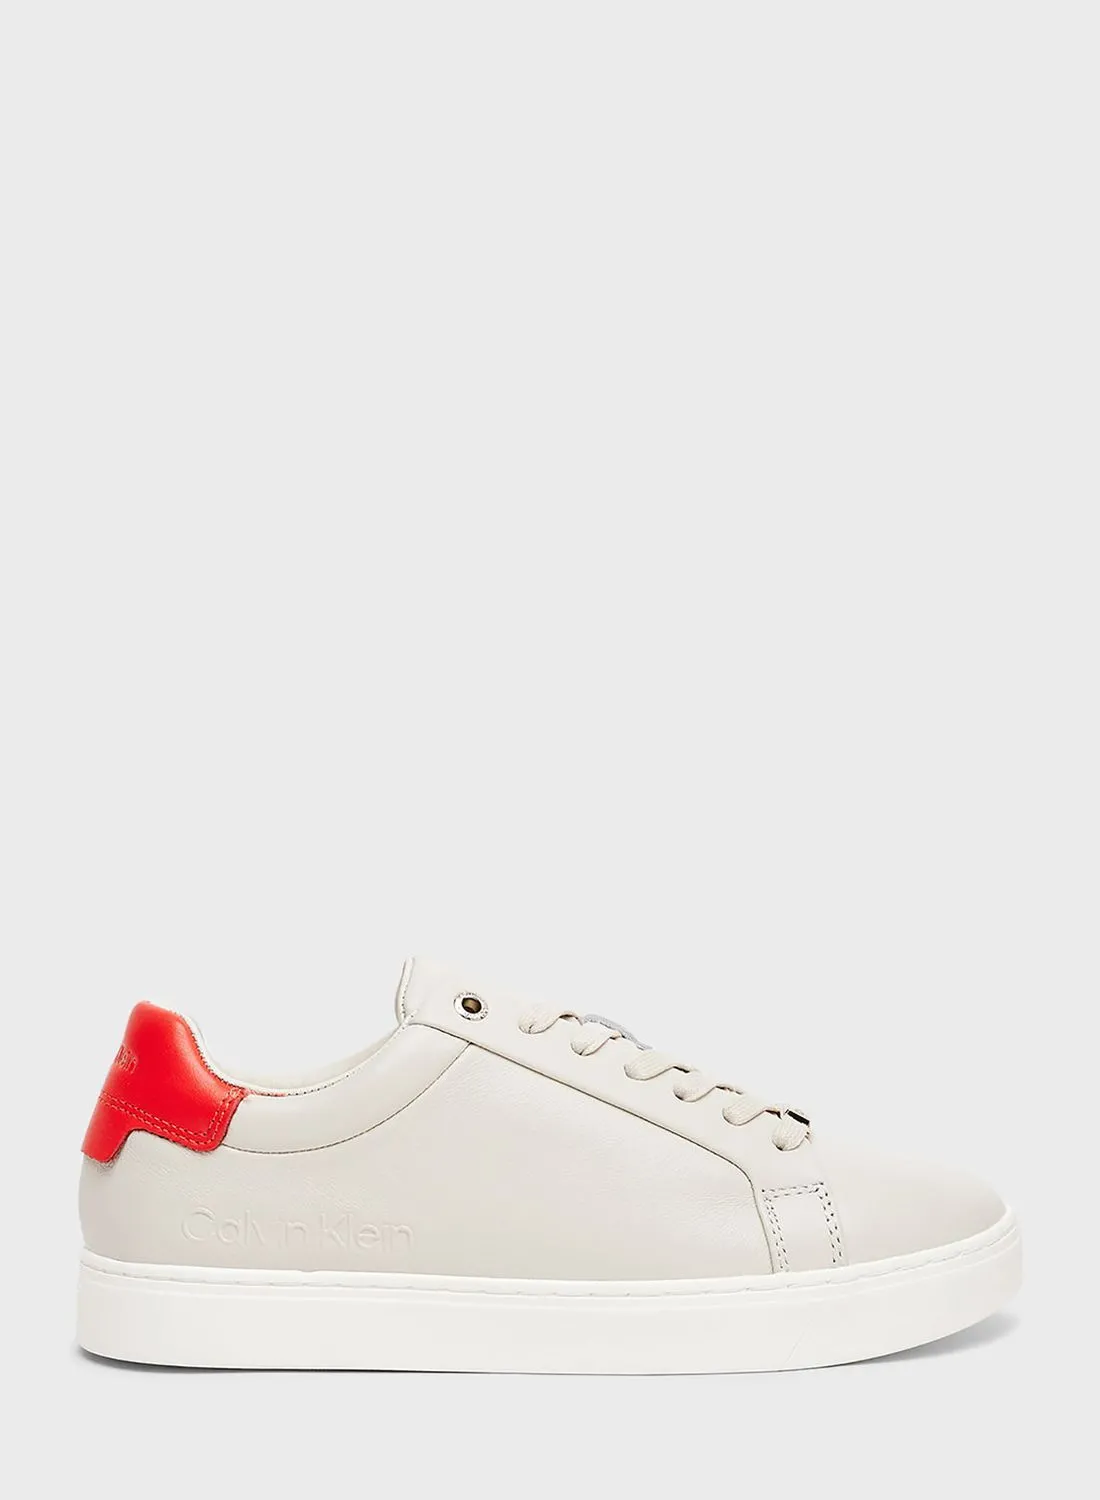 CALVIN KLEIN Logo Leather Lace Up Sneakers